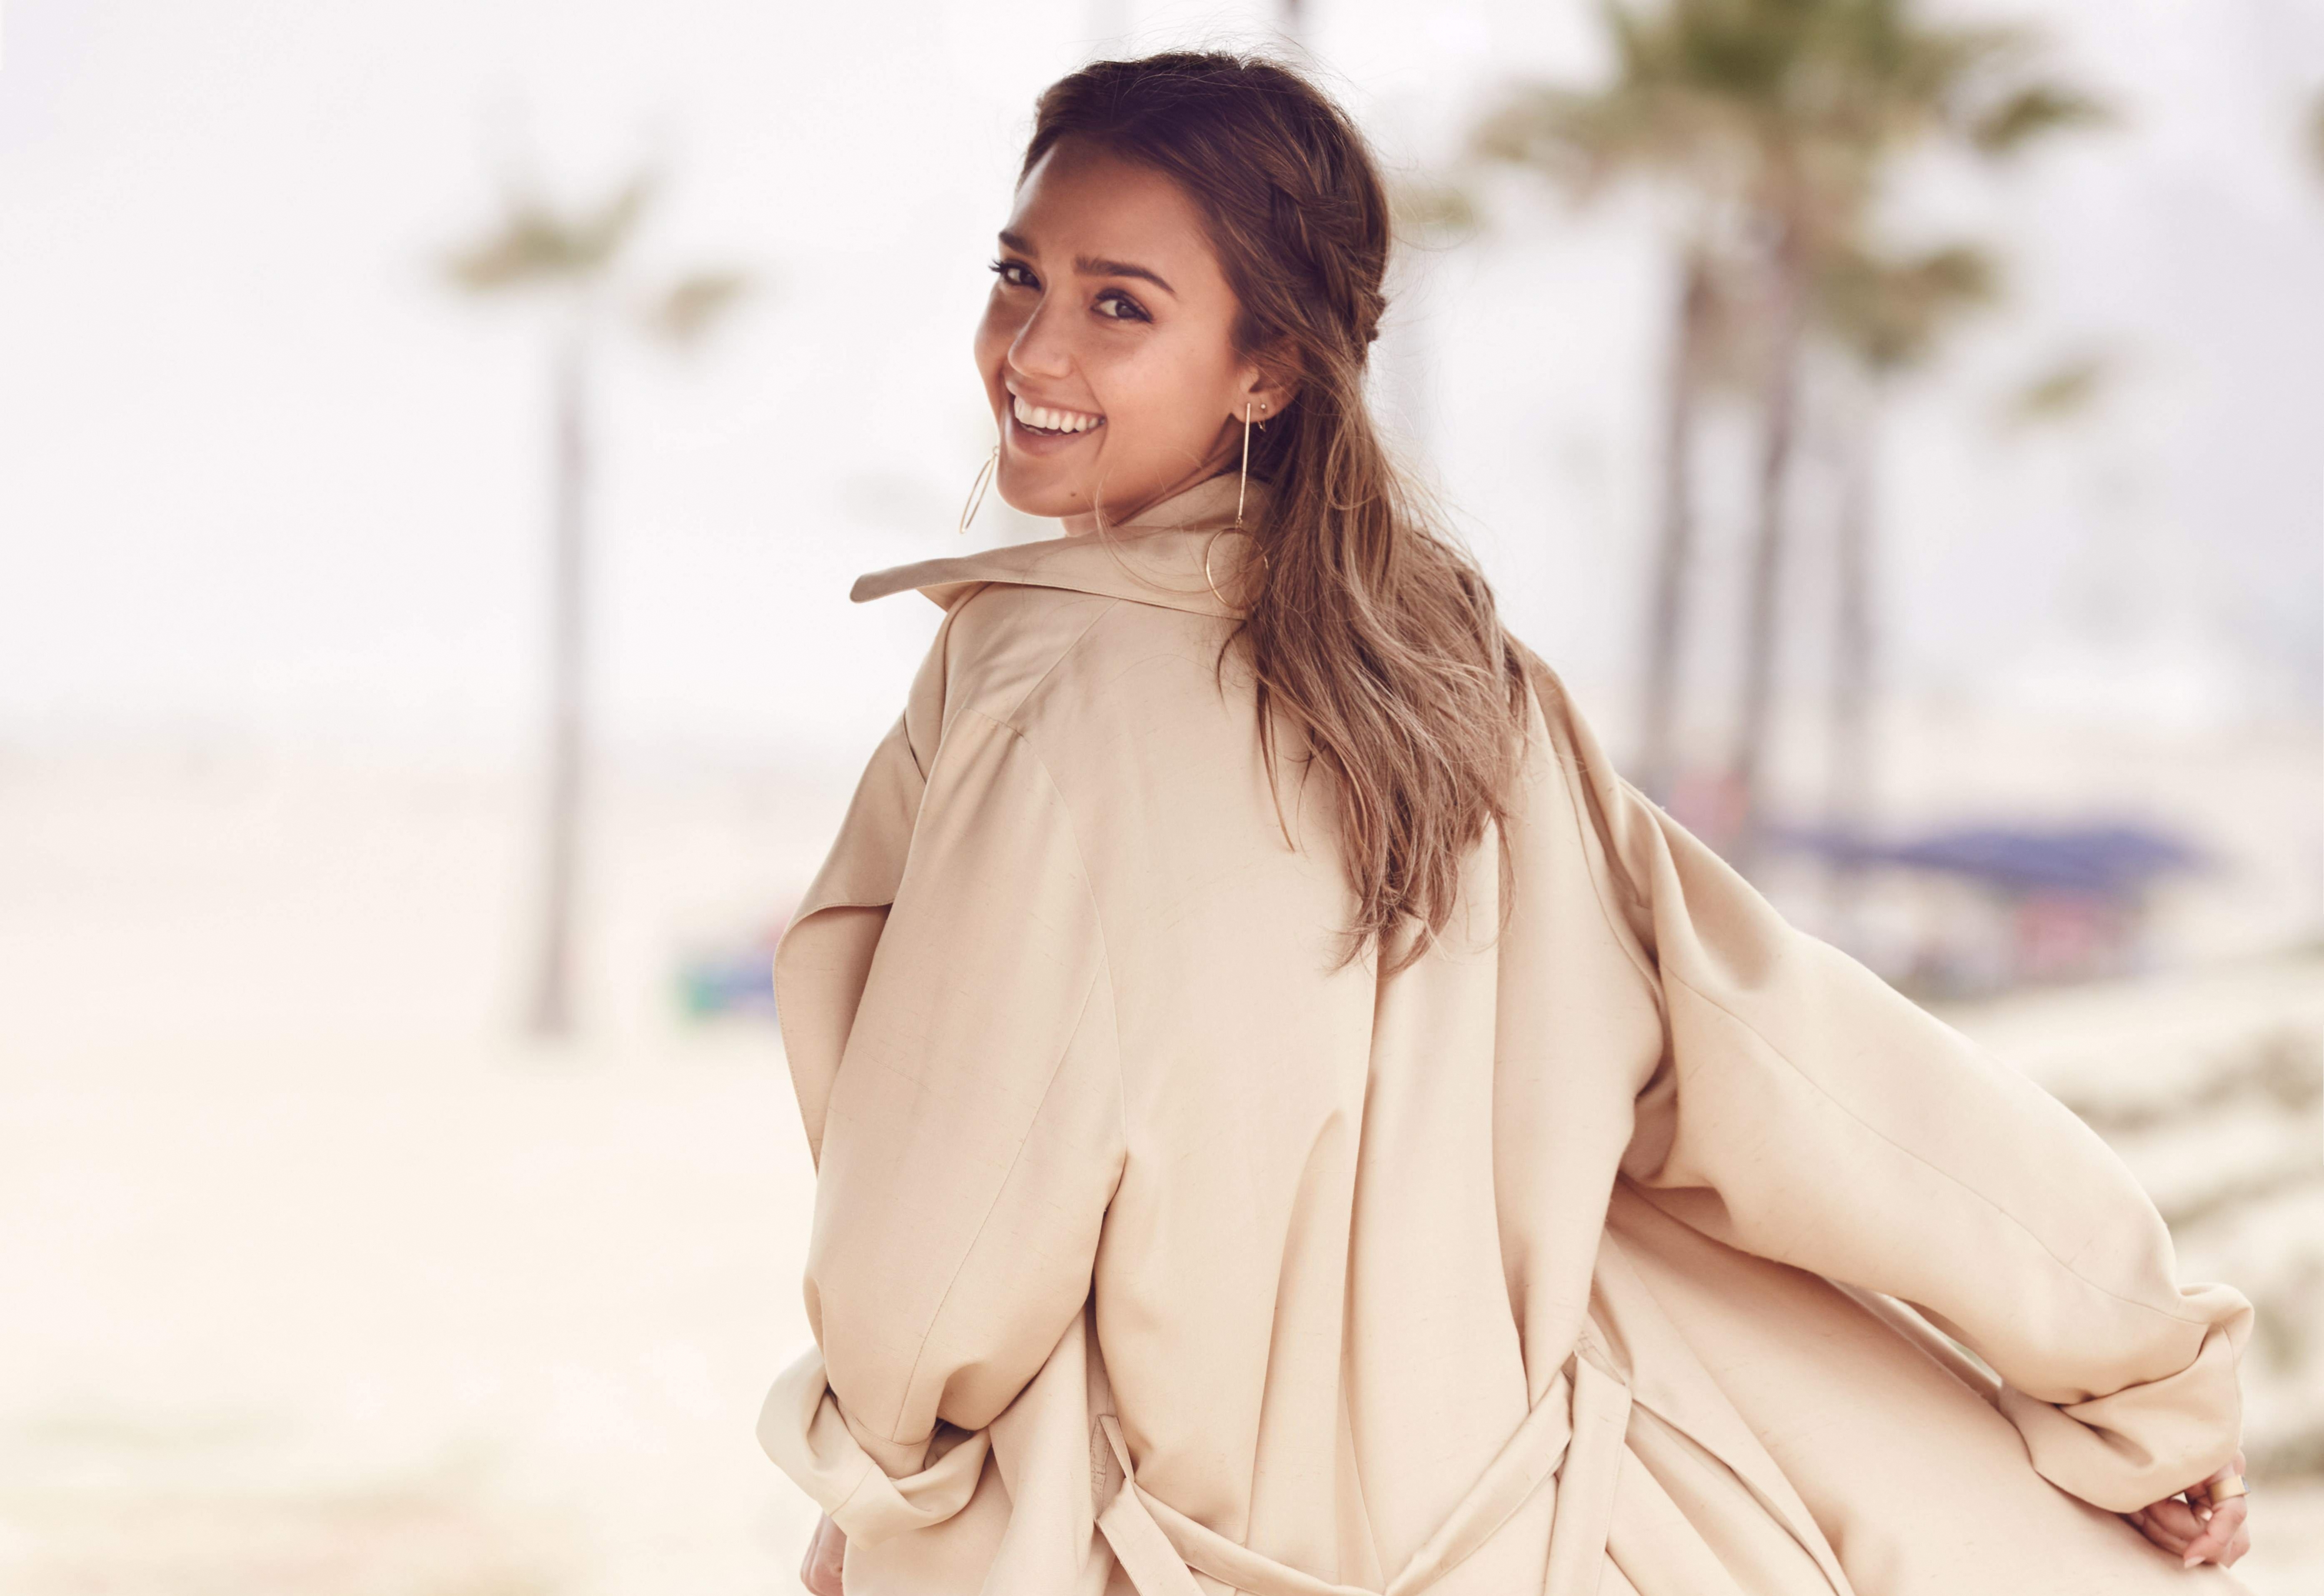 Wallpapers Jessica Alba view from behind smiling on the desktop